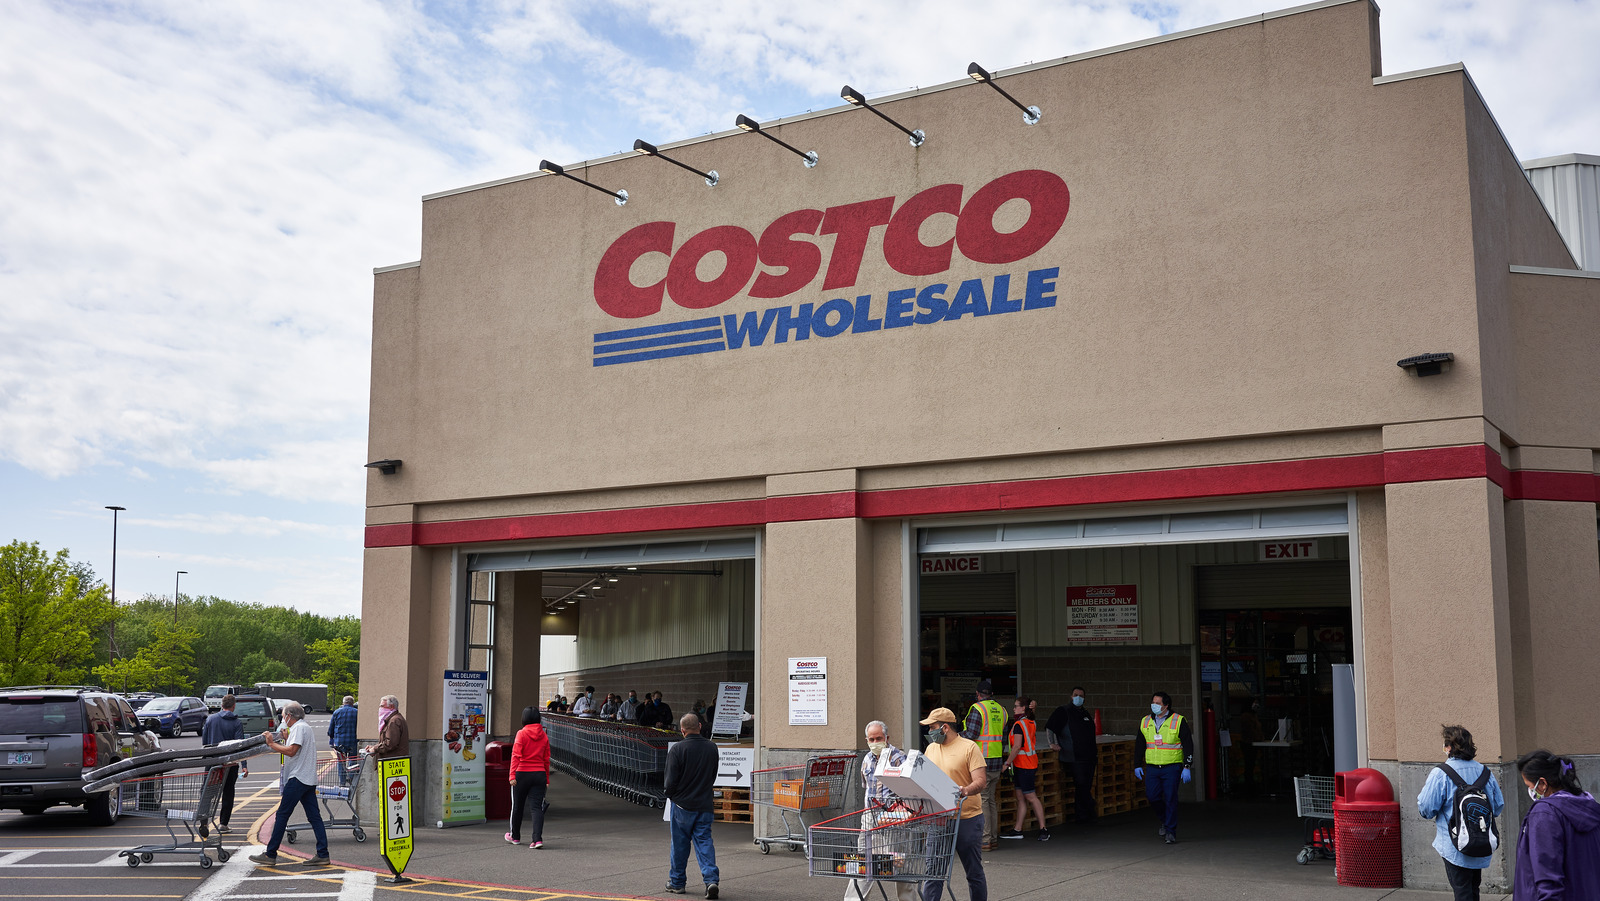 All The Benefits Of A Costco Membership